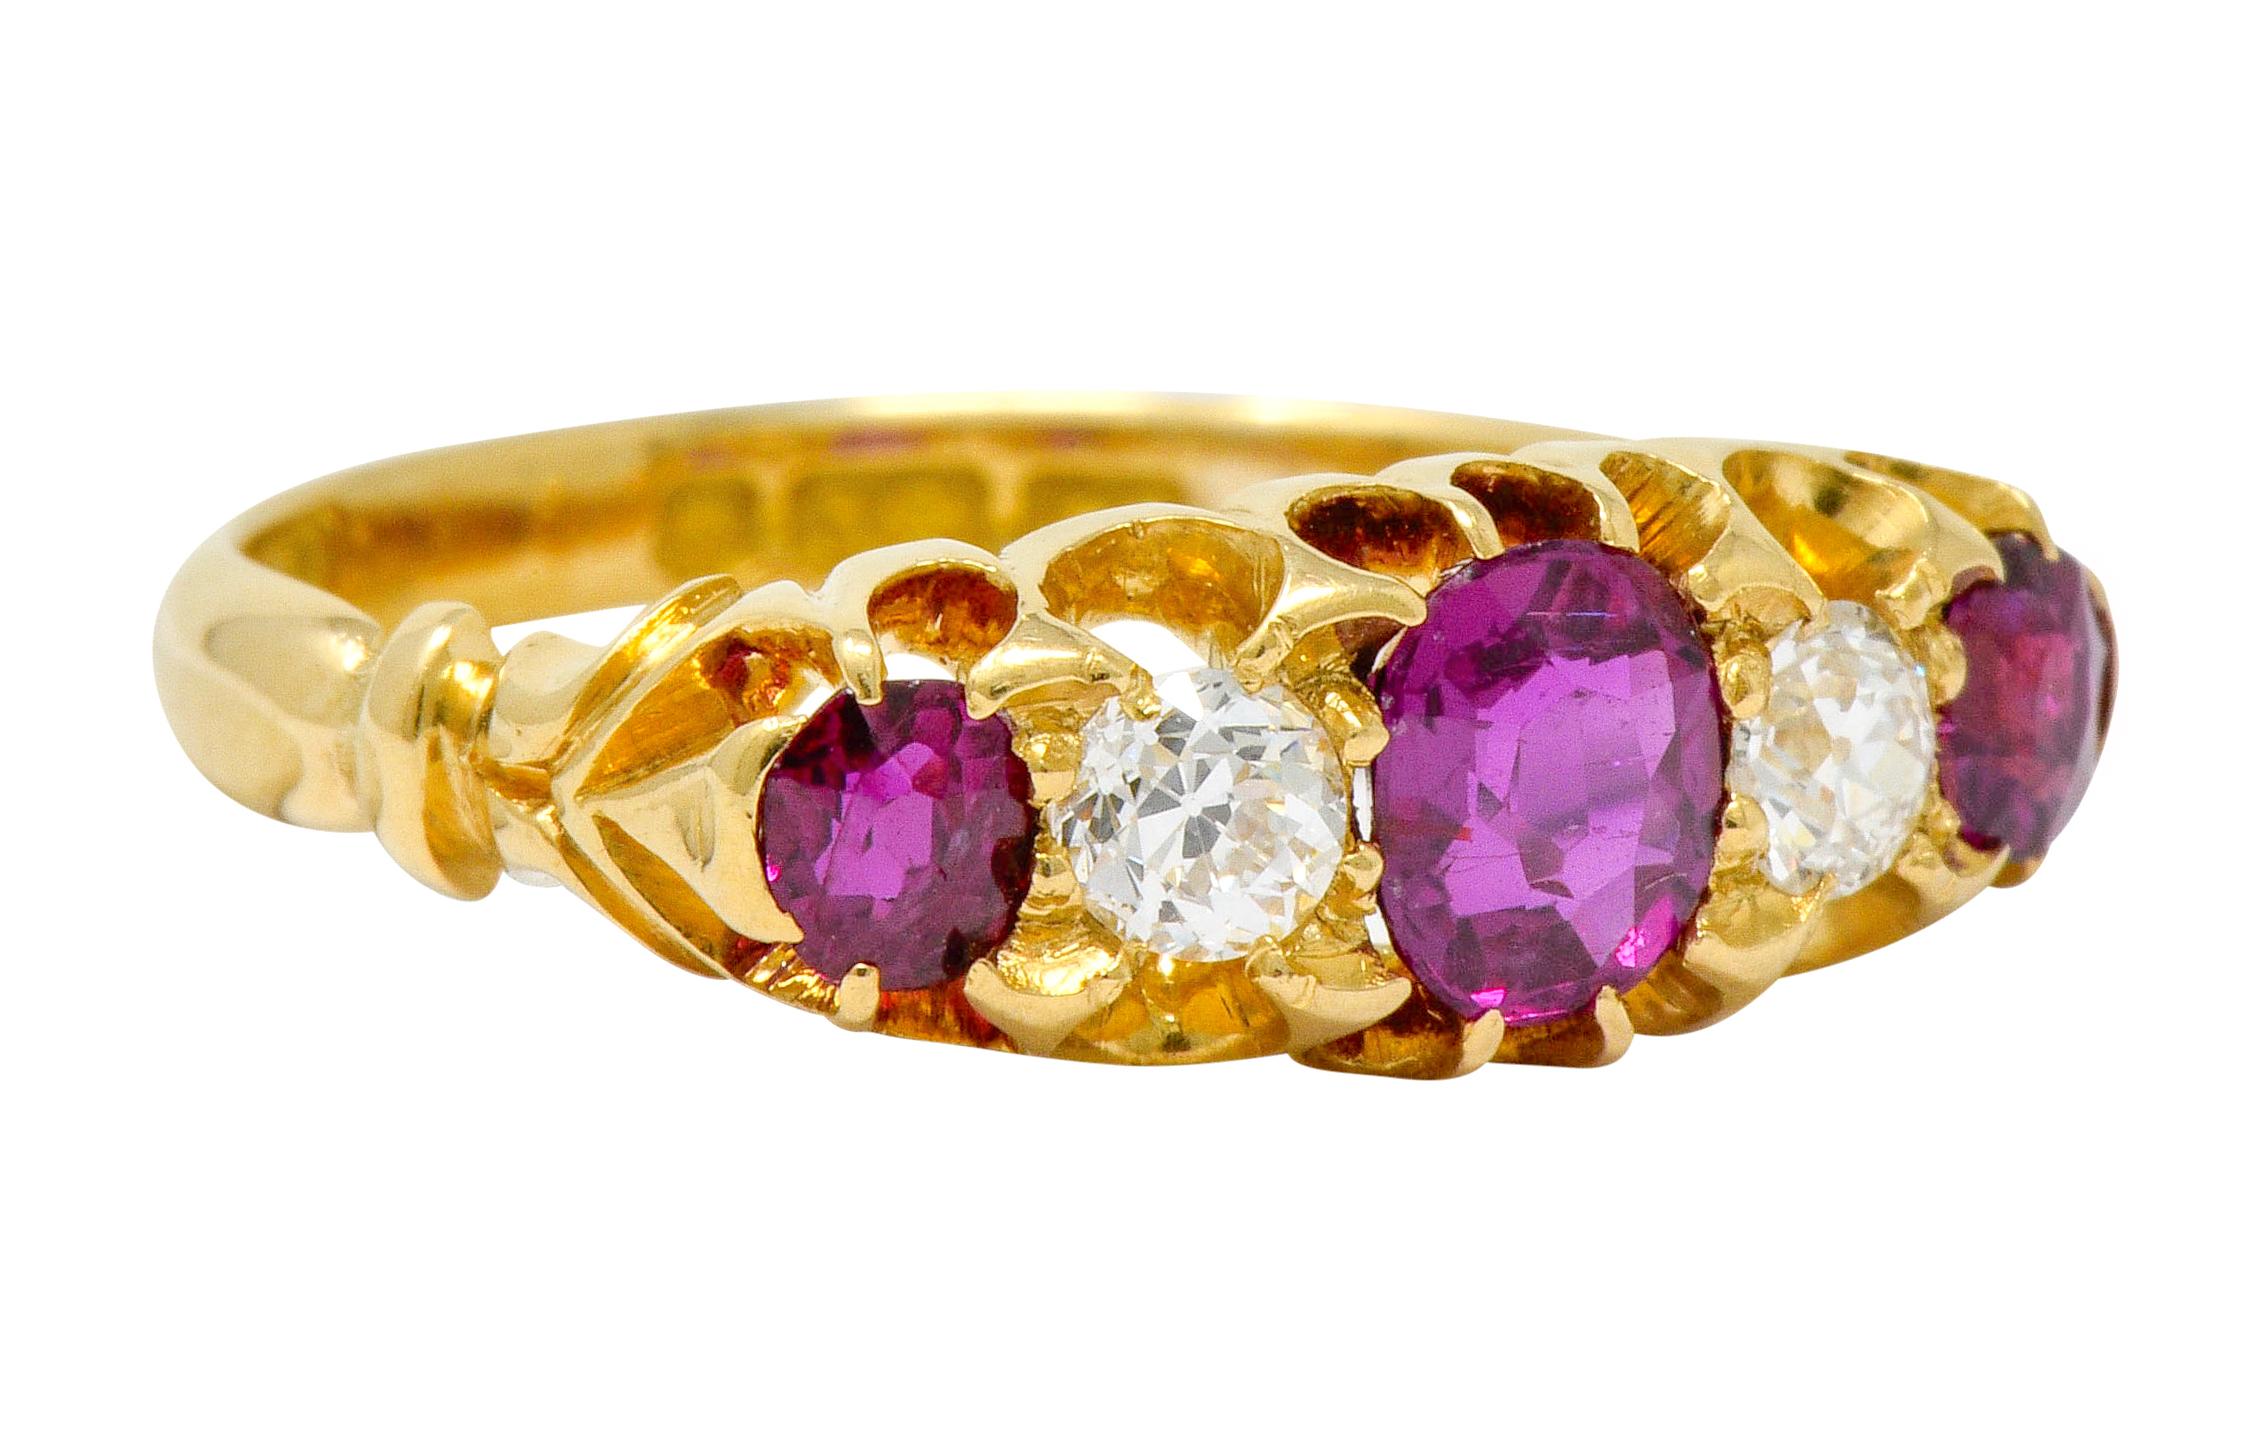 Band ring is claw set to front with rubies and diamonds, alternating

Rubies are round and oval cut and weigh in total approximately 0.84 carat, well-matched and purplish-red in color

Old European cut diamonds weigh in total approximately 0.30